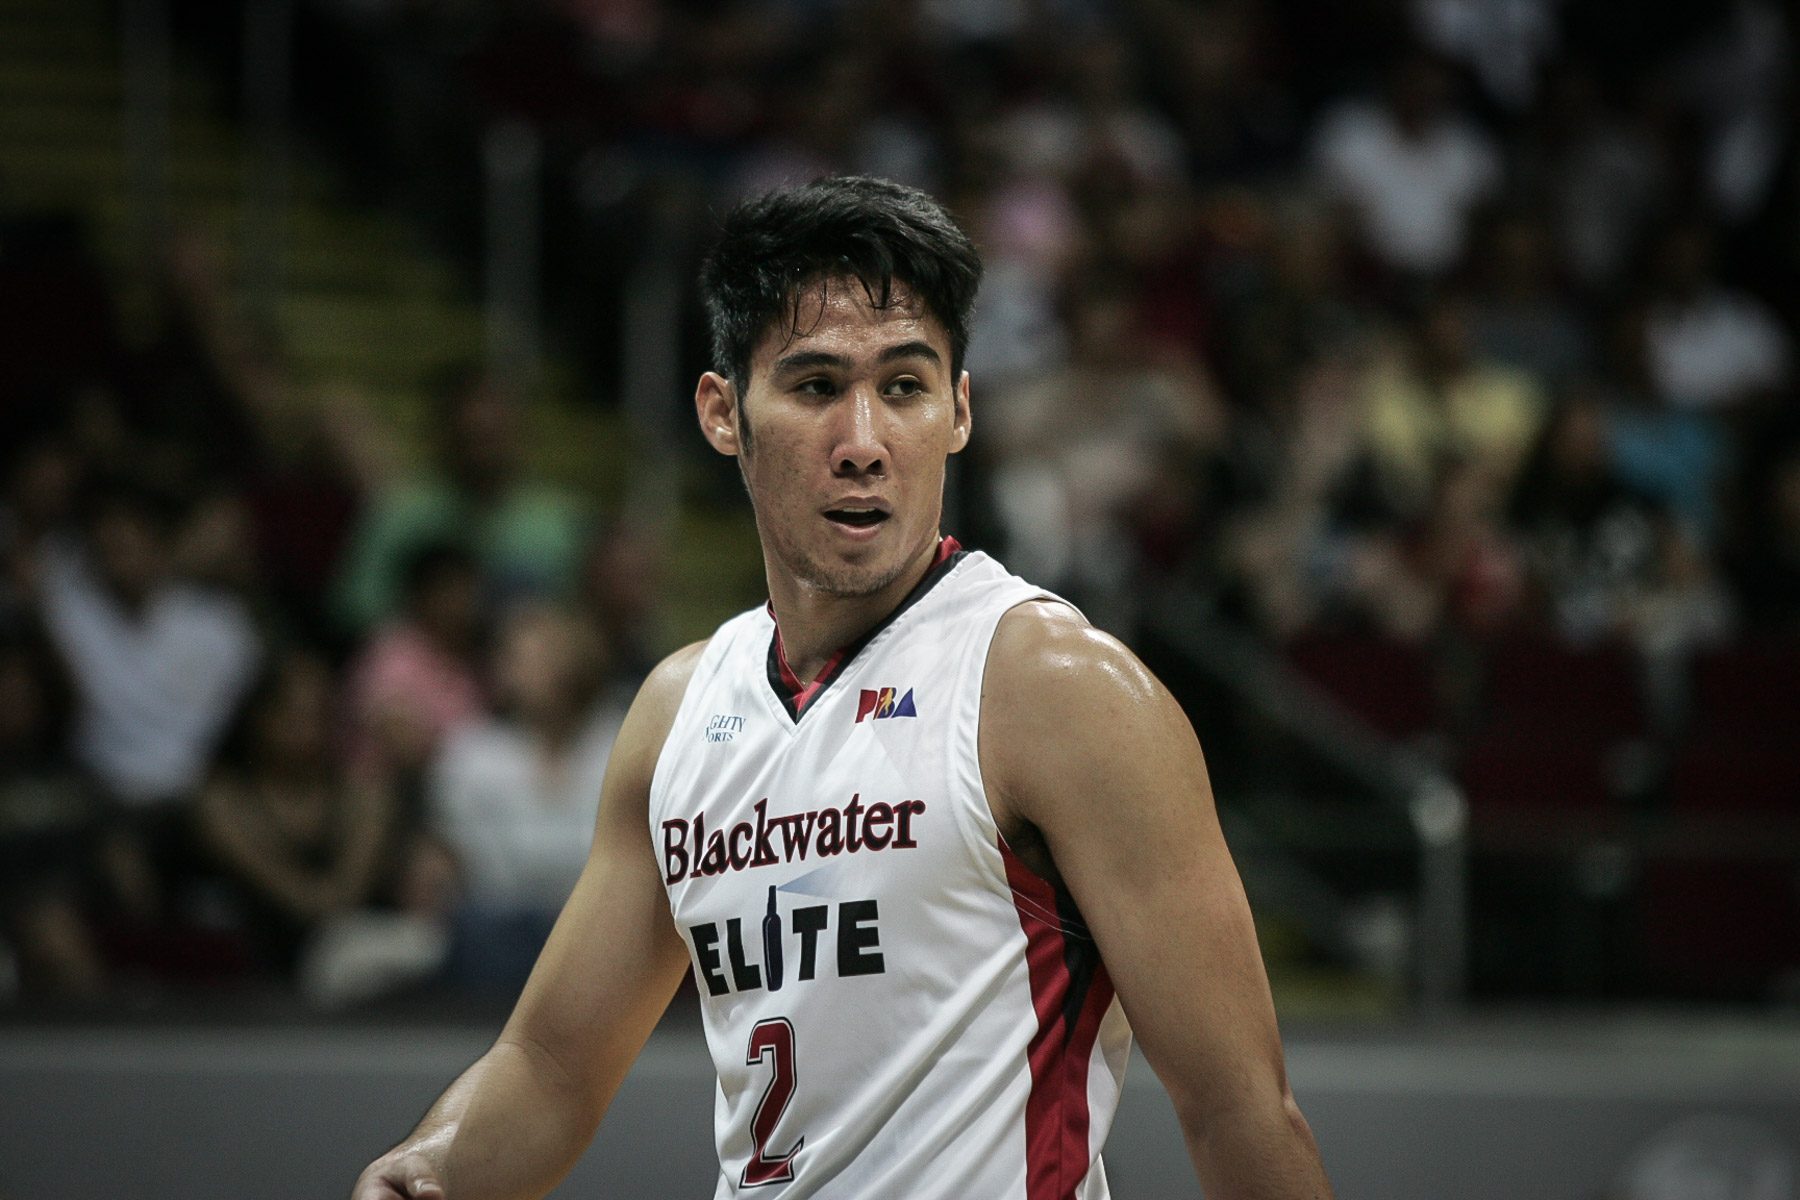 The top 5 rookies in the PBA so far